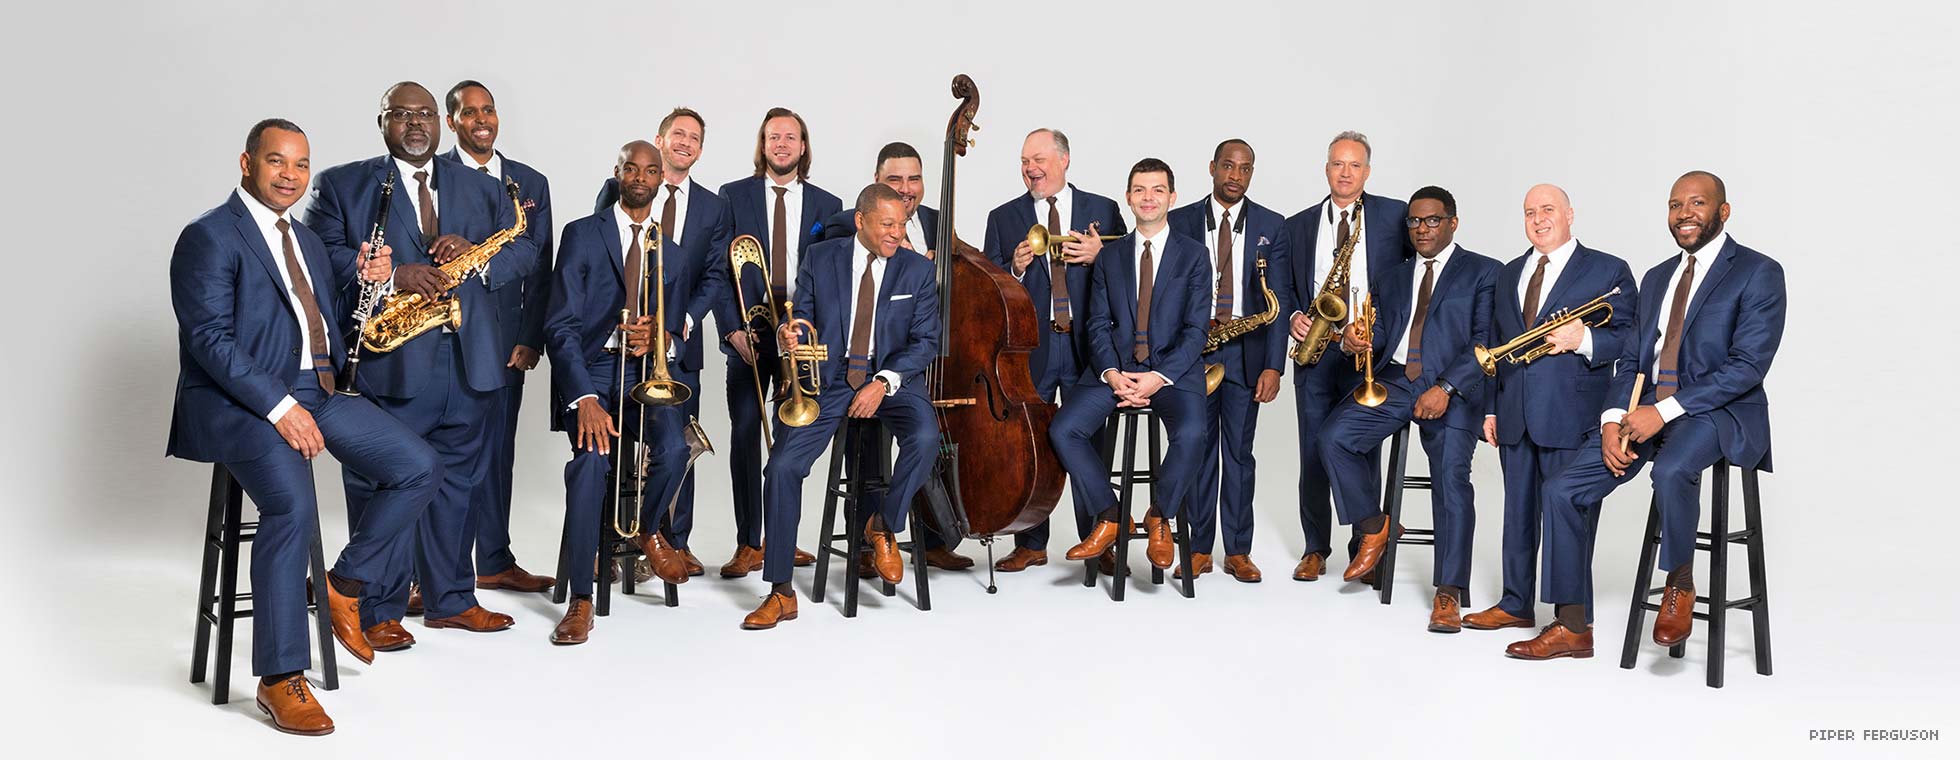 15 musicians holding their instruments and wearing suits, stand in a row with Wynton Marsalis at the center.